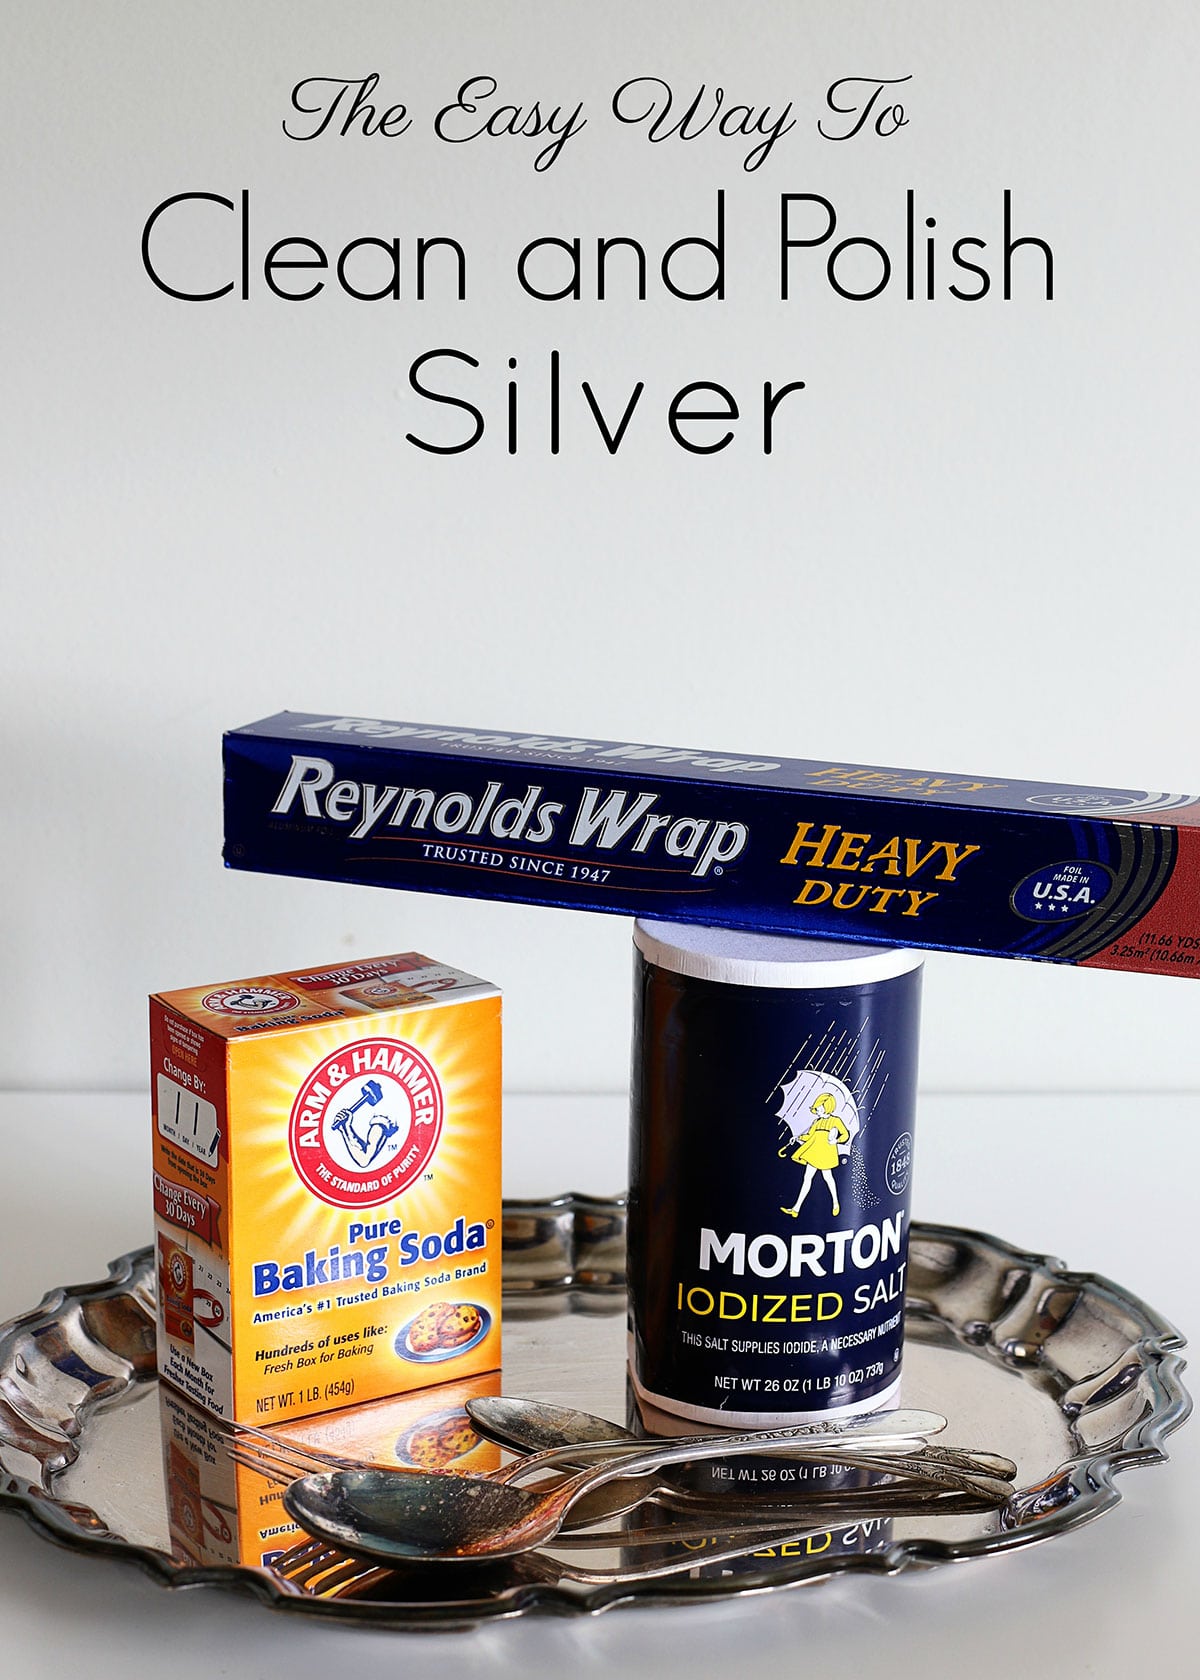 East way to clean and polish silver